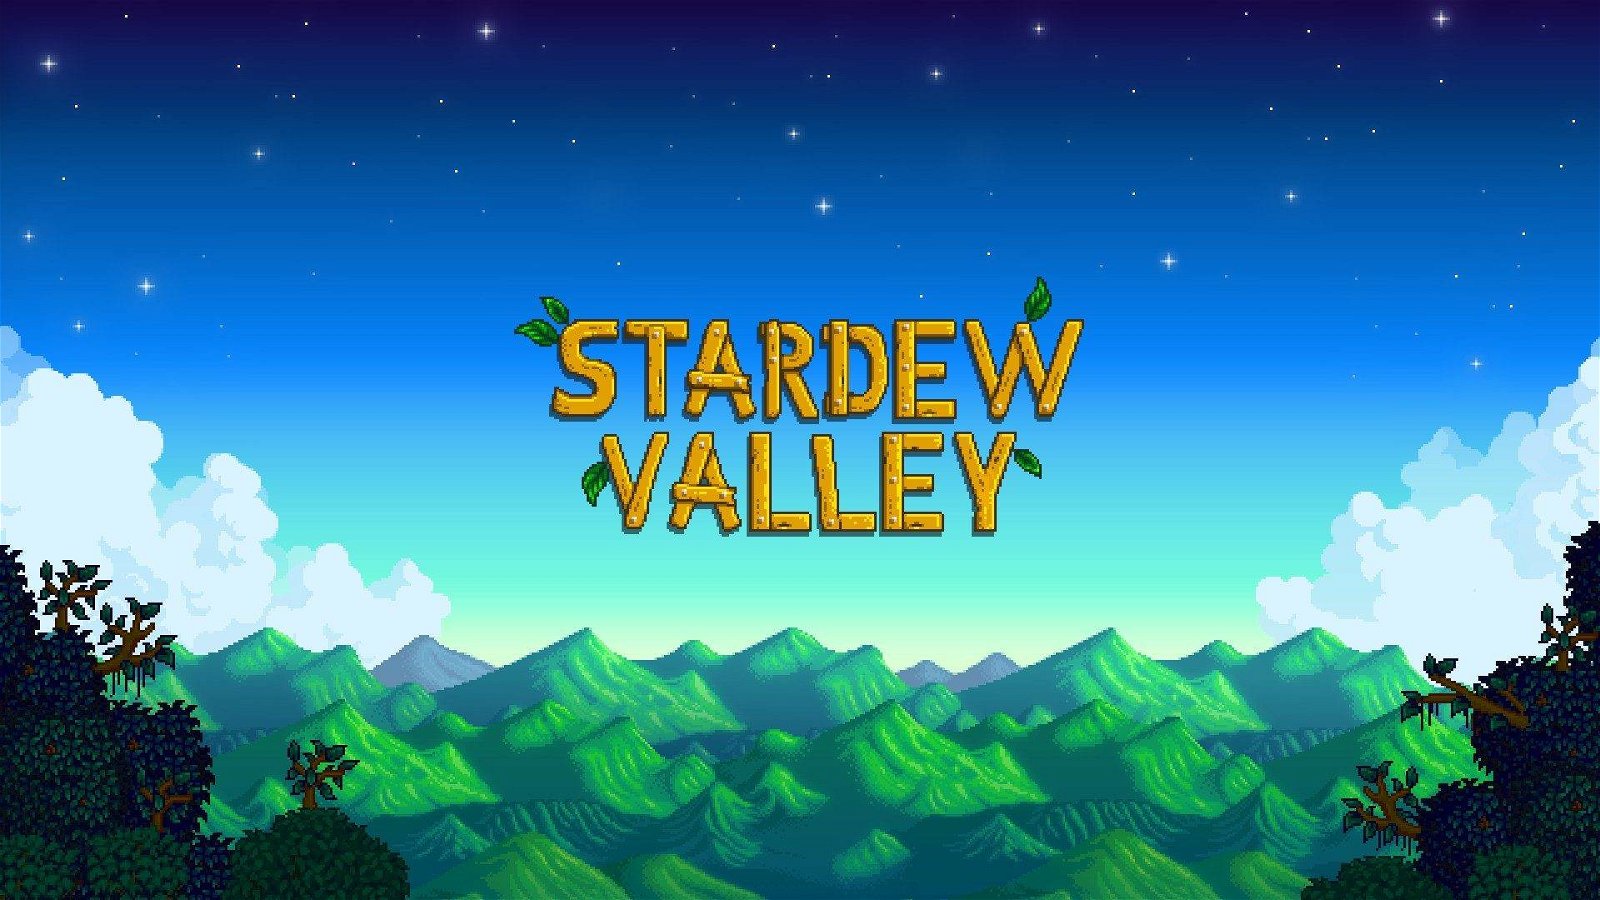 Stardew Valley is coming to Xbox Game Pass This Month